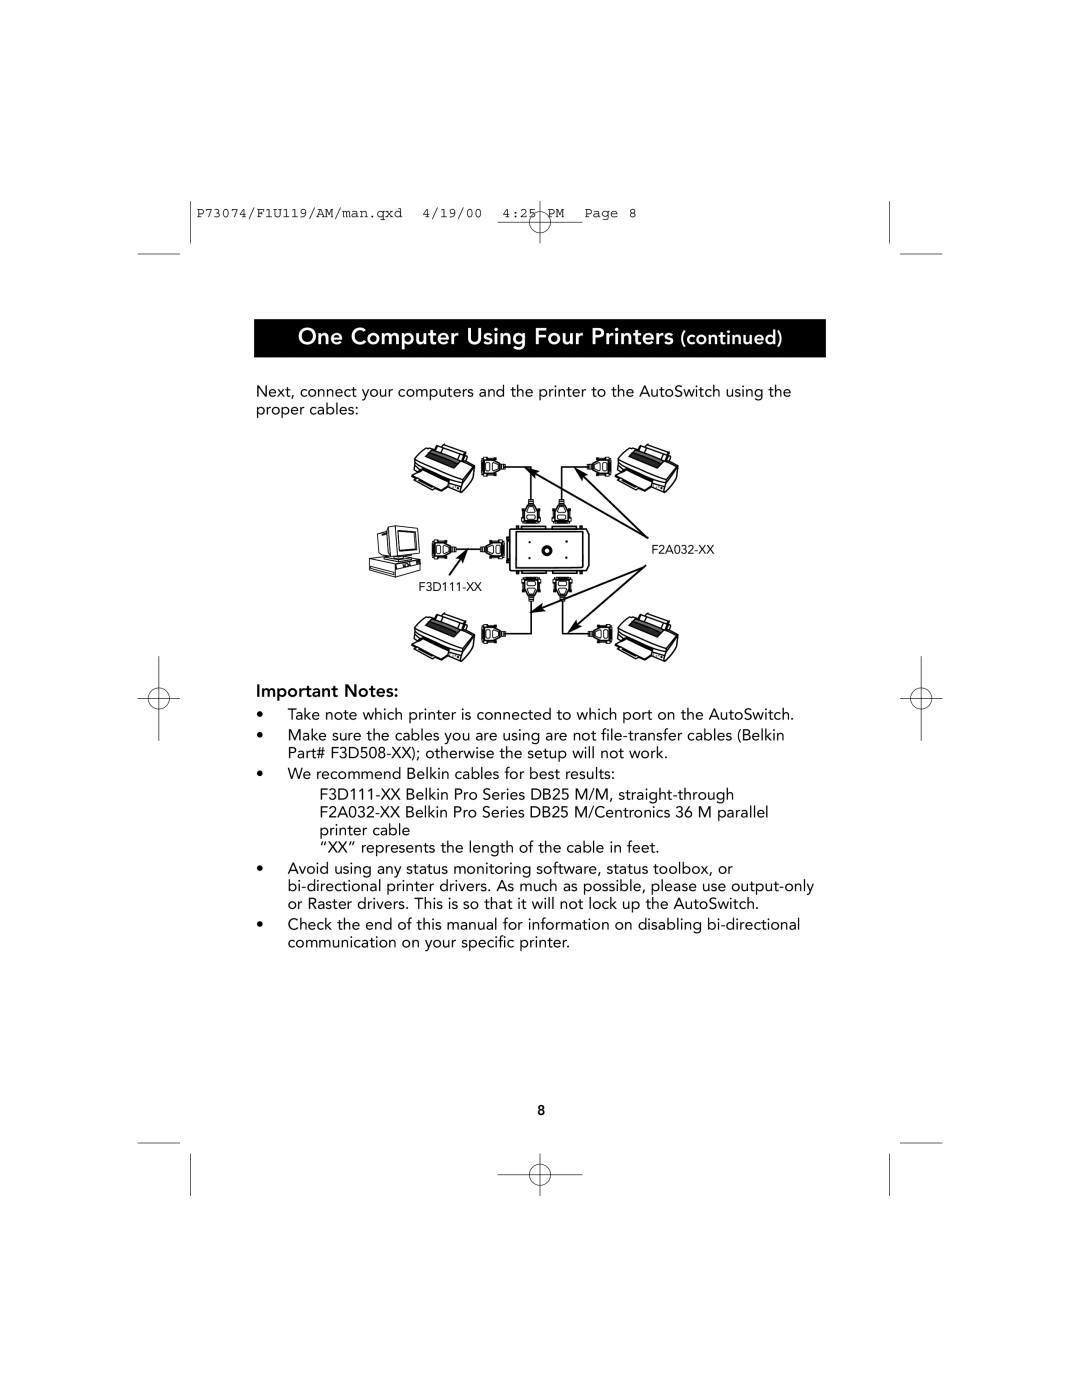 Belkin F1U119 user manual One Computer Using Four Printers continued, Important Notes 